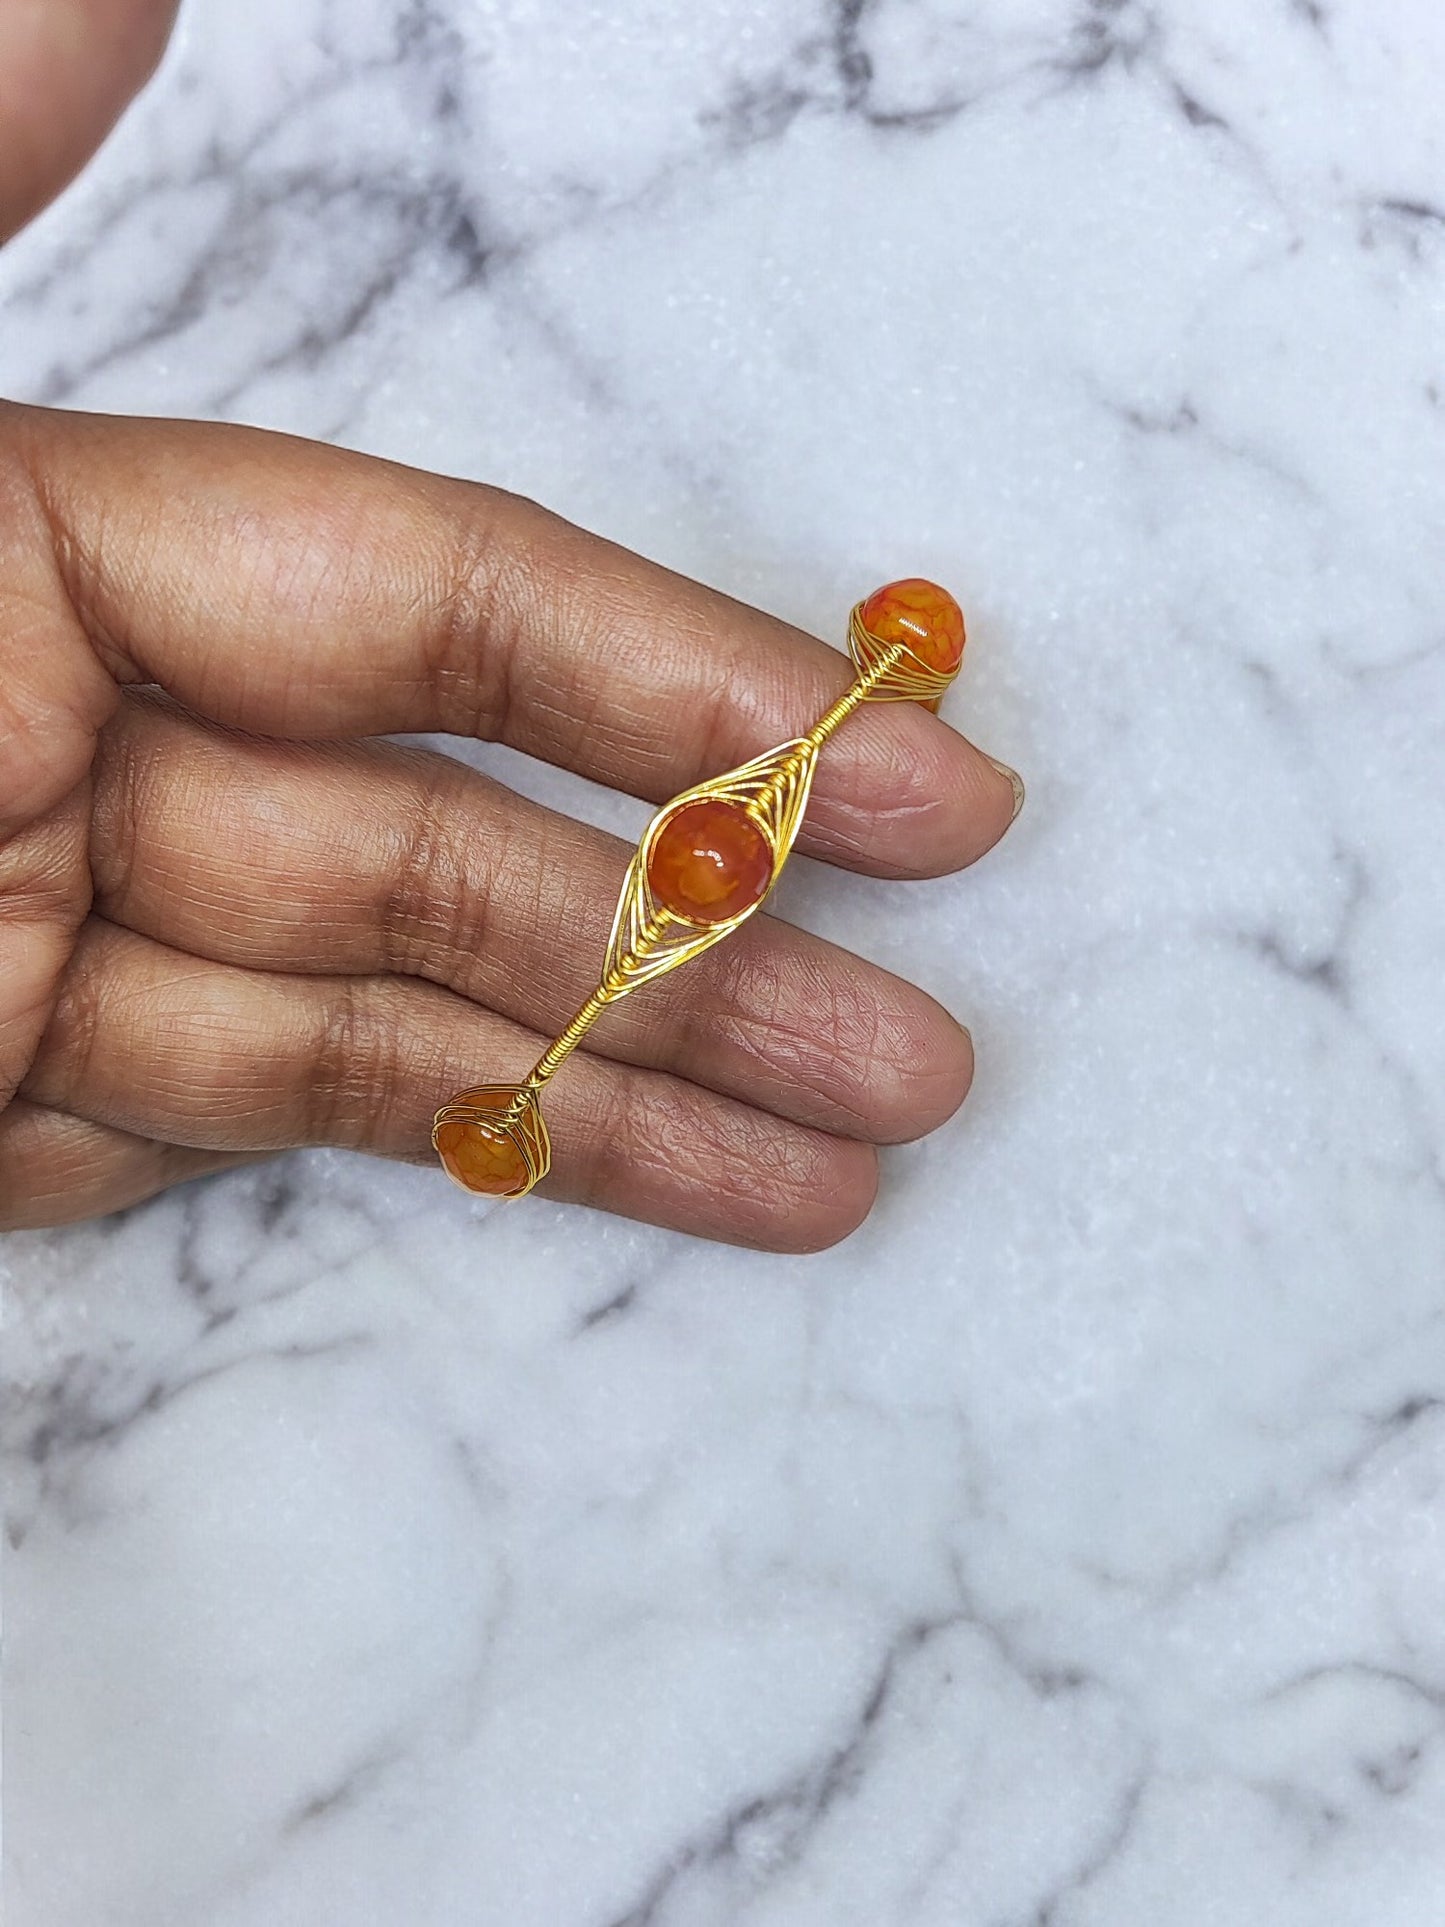 <p data-mce-fragment="1">Add a pop of color and style to any outfit with the playful Clarissa Wire Wrap Bracelet. Featuring vibrant orange Agate beads wrapped in golden wire, this bracelet is adjustable for the perfect fit. Accessorize with a touch of quirky charm!</p>